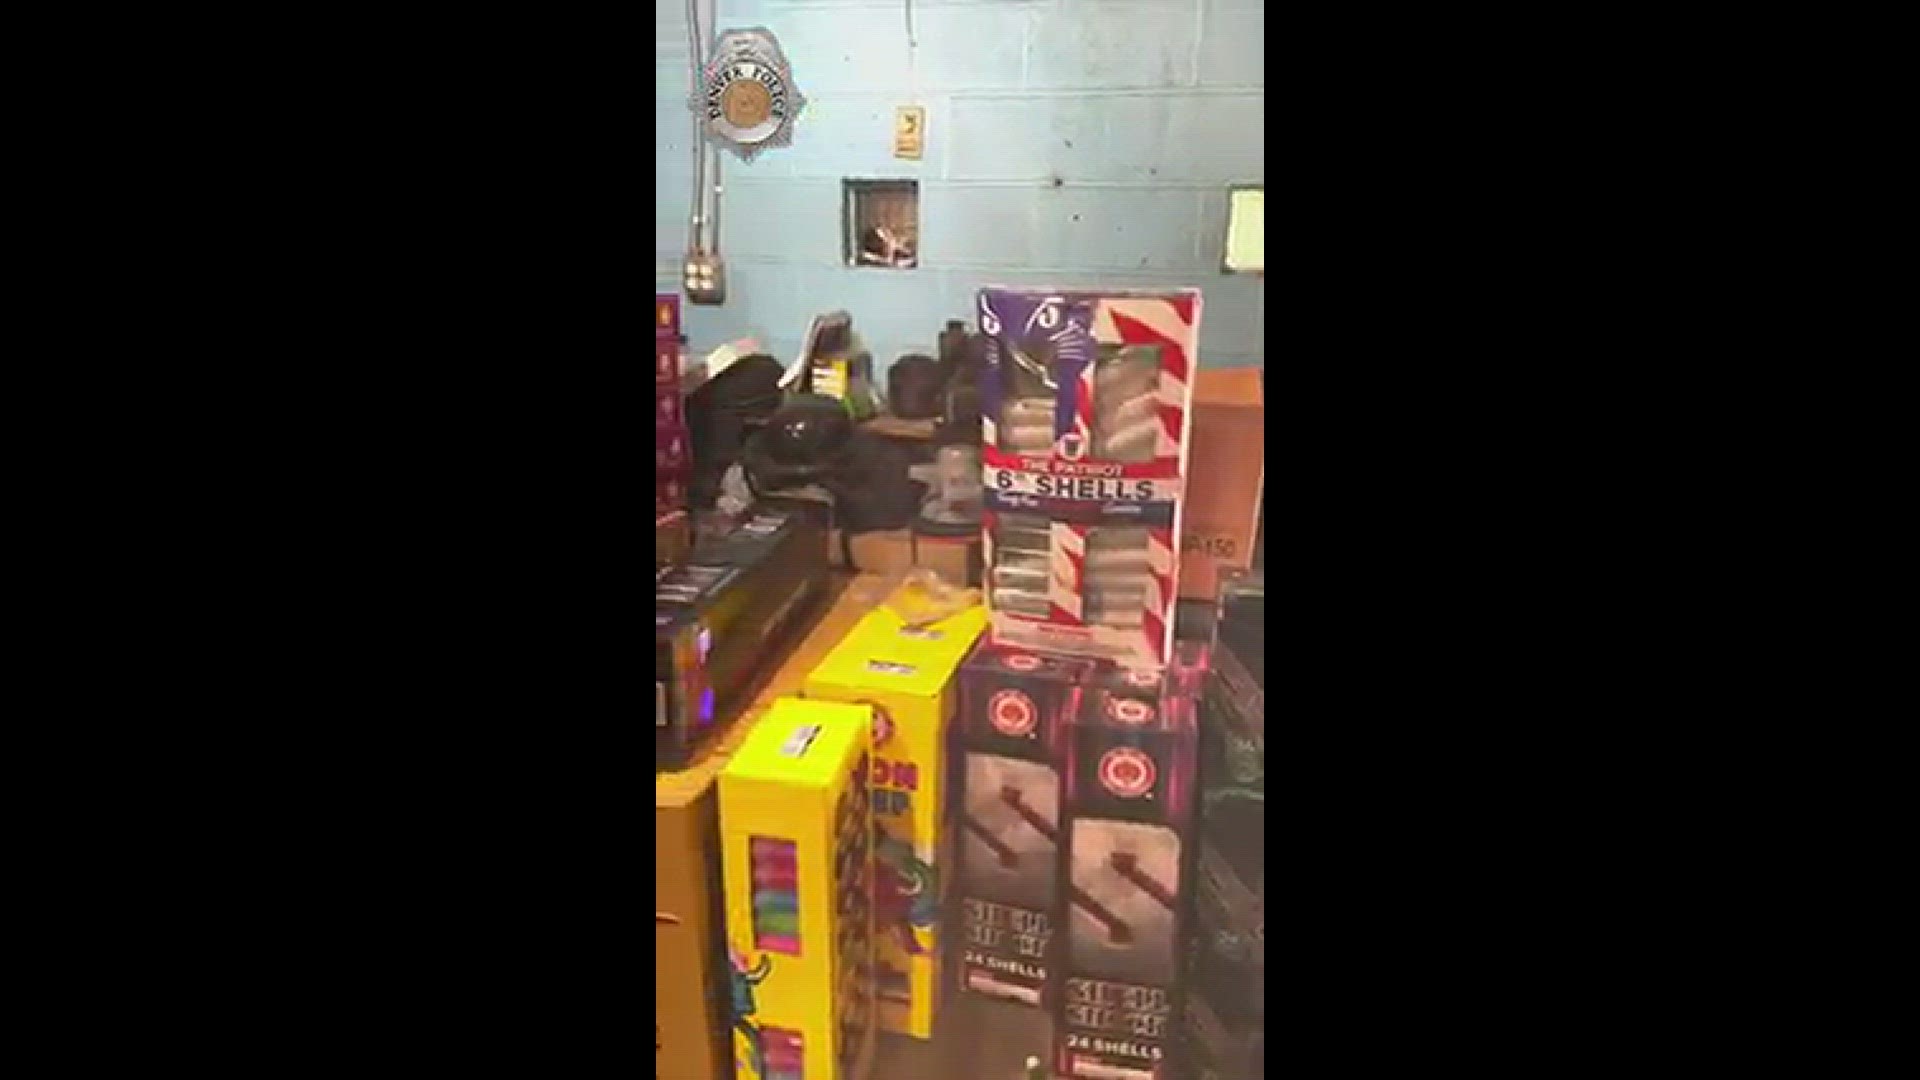 Police seized $80,000 worth of illegal fireworks being sold out of a southwest Denver home.